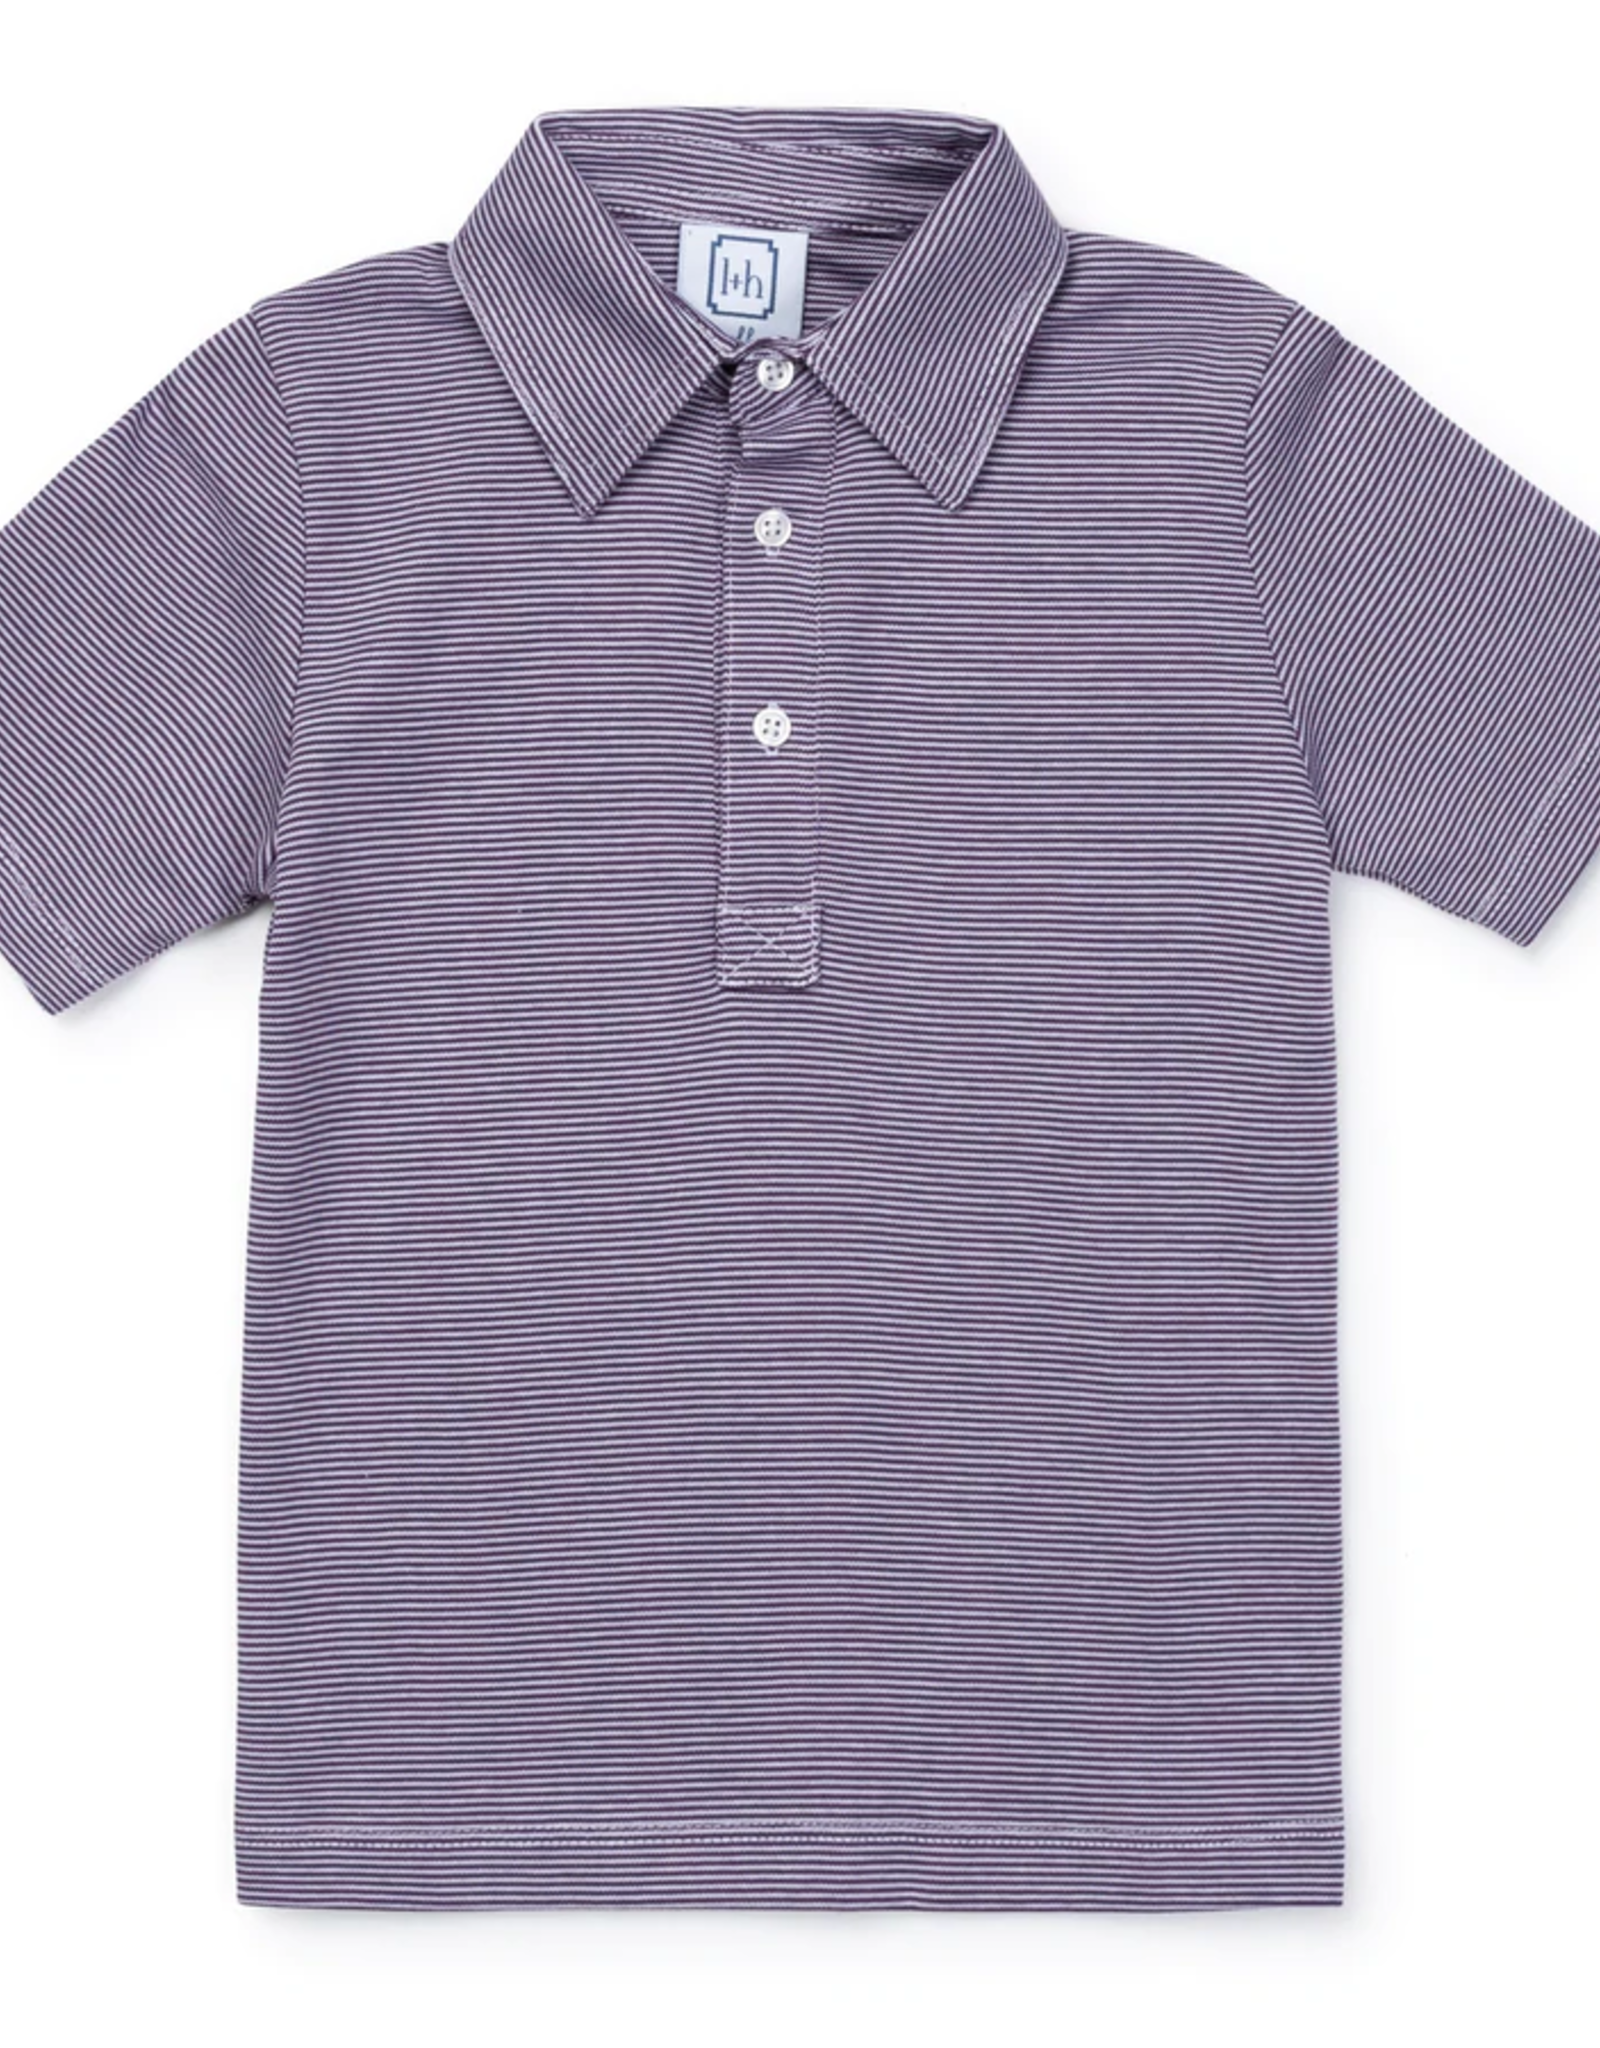 Lila and Hayes Griffin Polo Shirt Purple and White Stripe